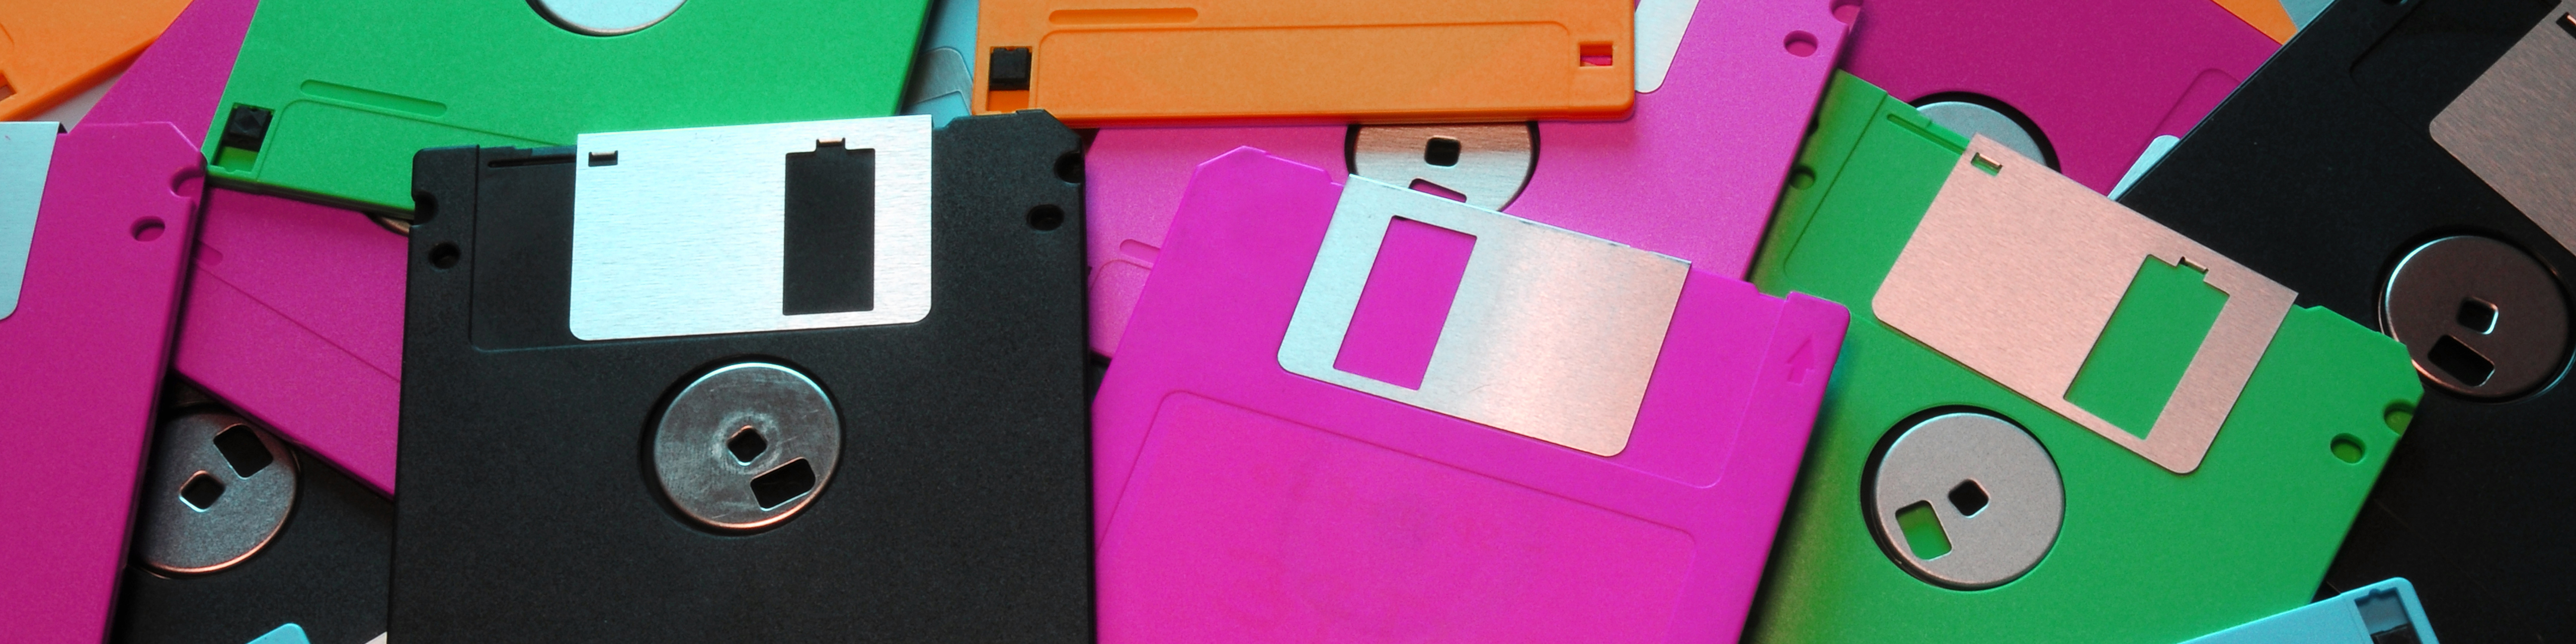 Pile of floppy disks in various colors